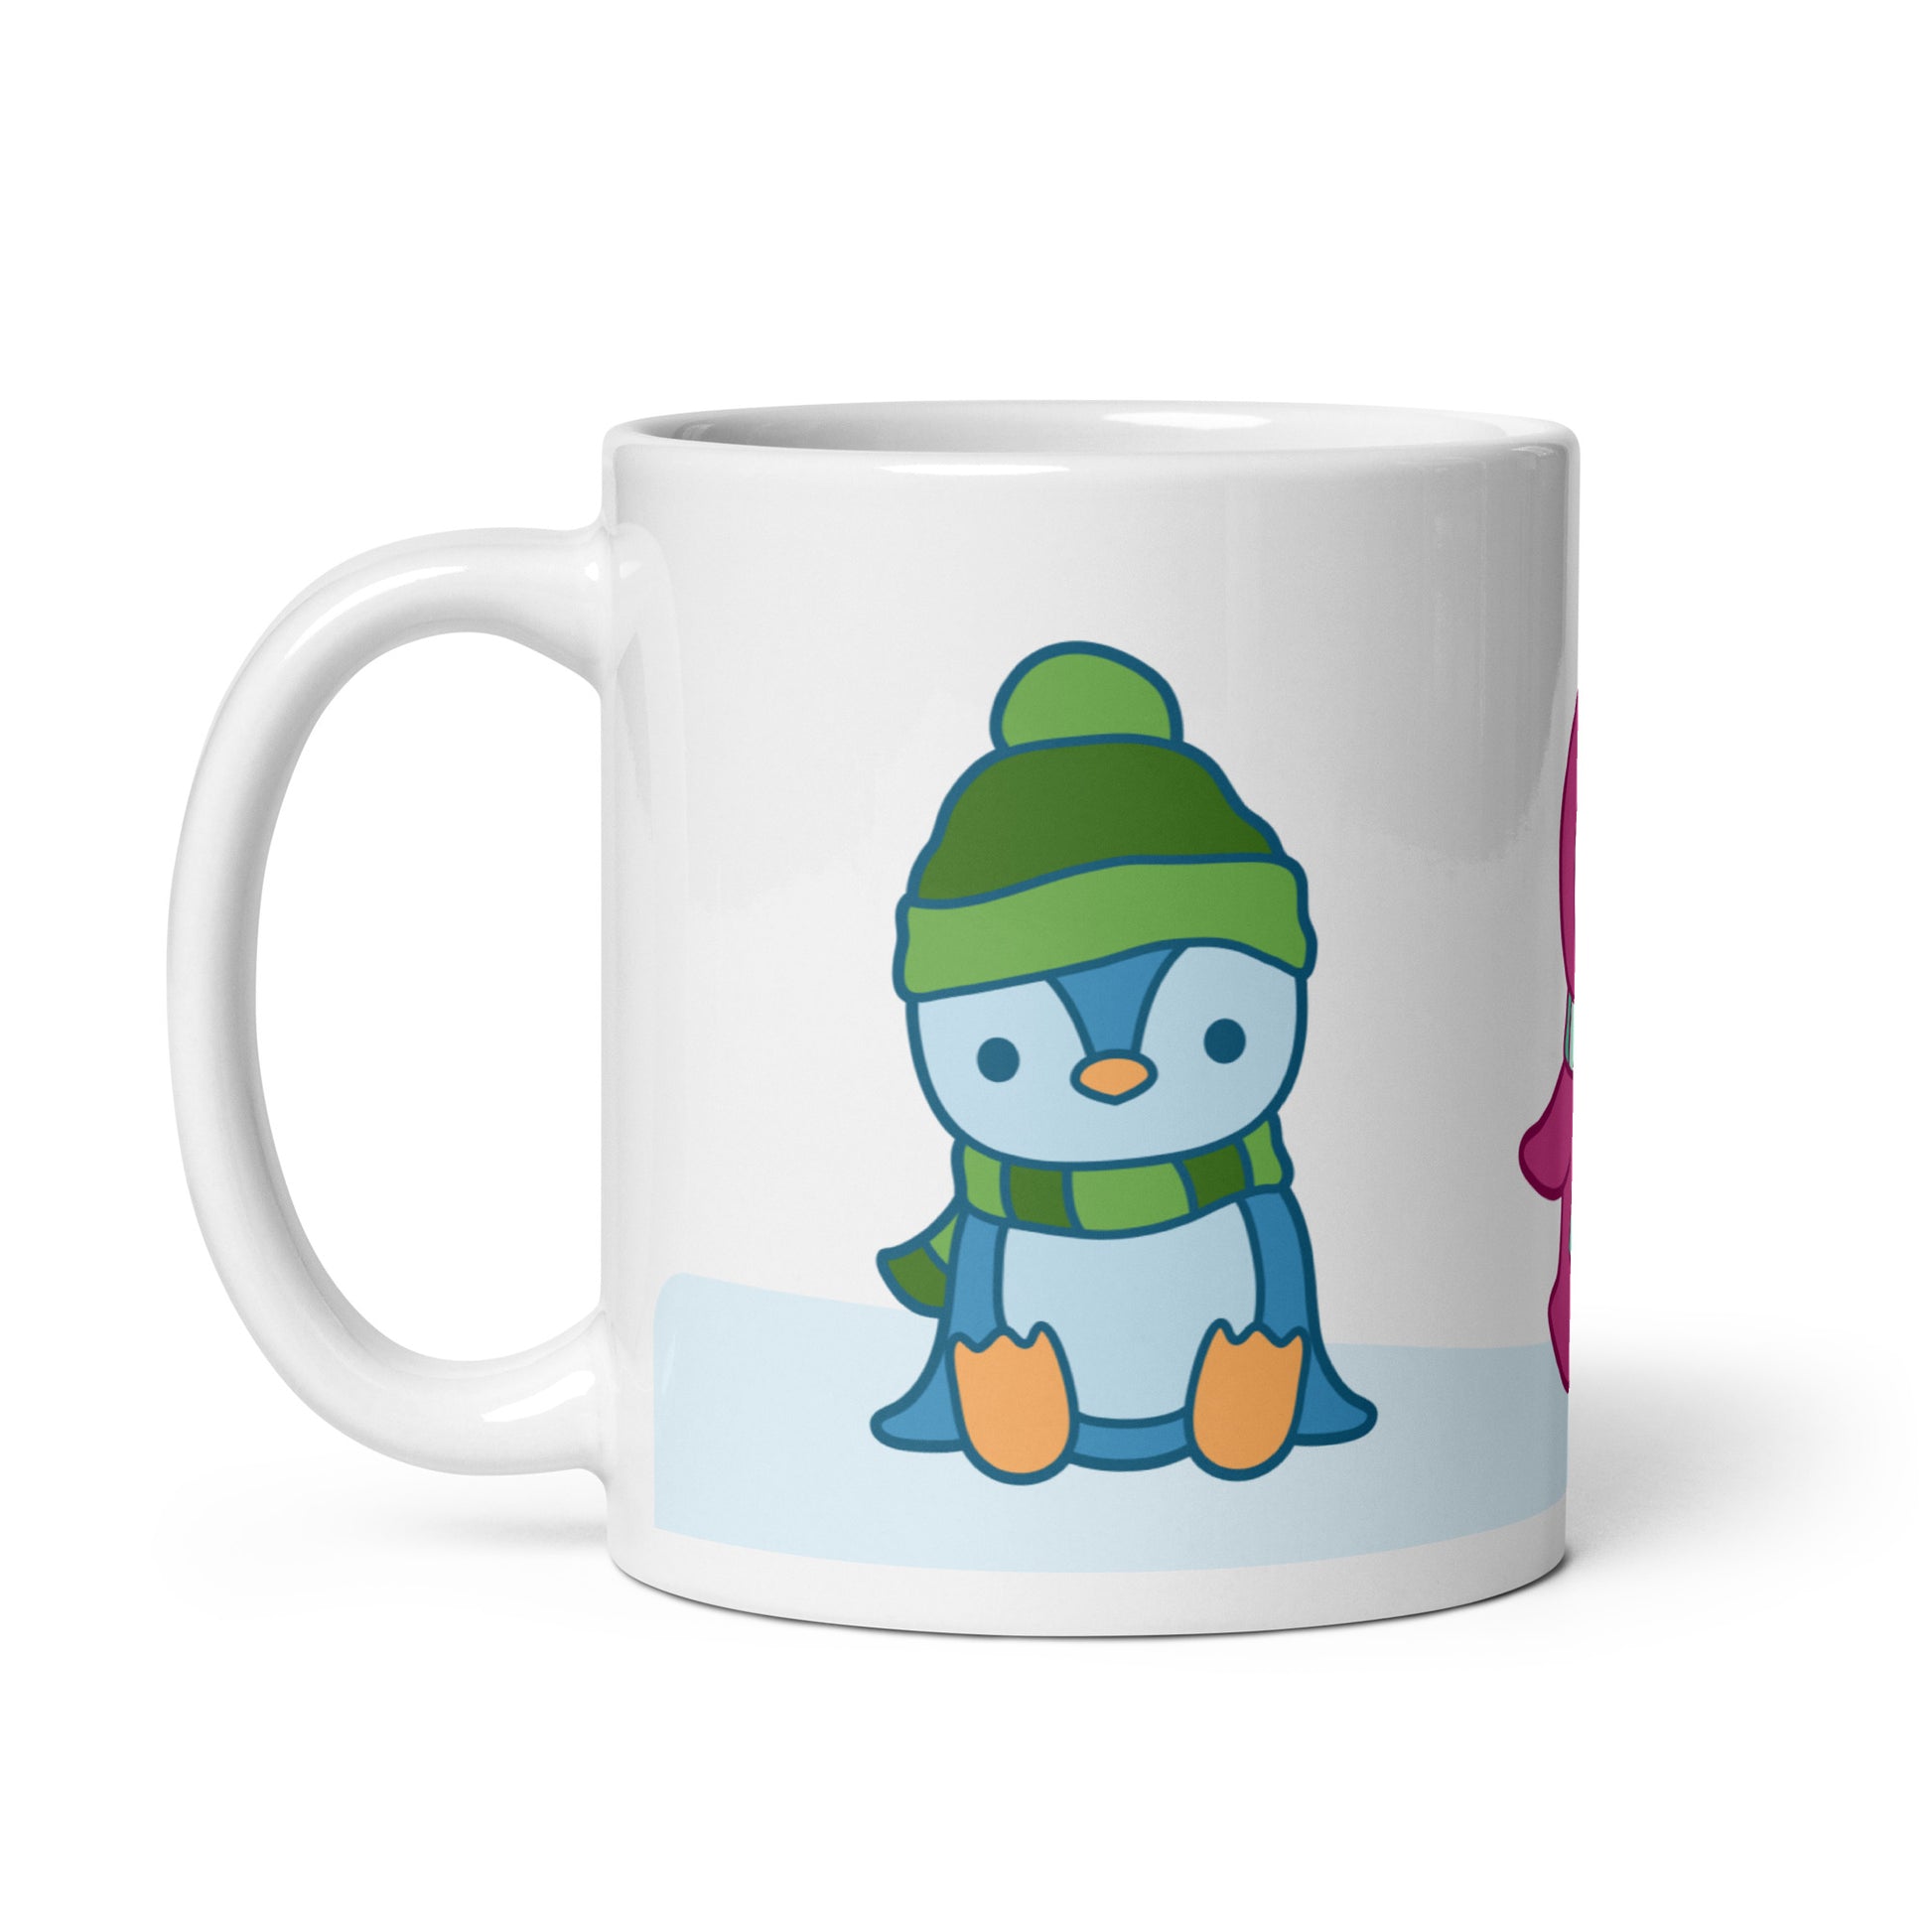 A white 11 ounce ceramic mug featuring an illustration of peguins in the snow. The primary visible penguin is blue, with a green hat.